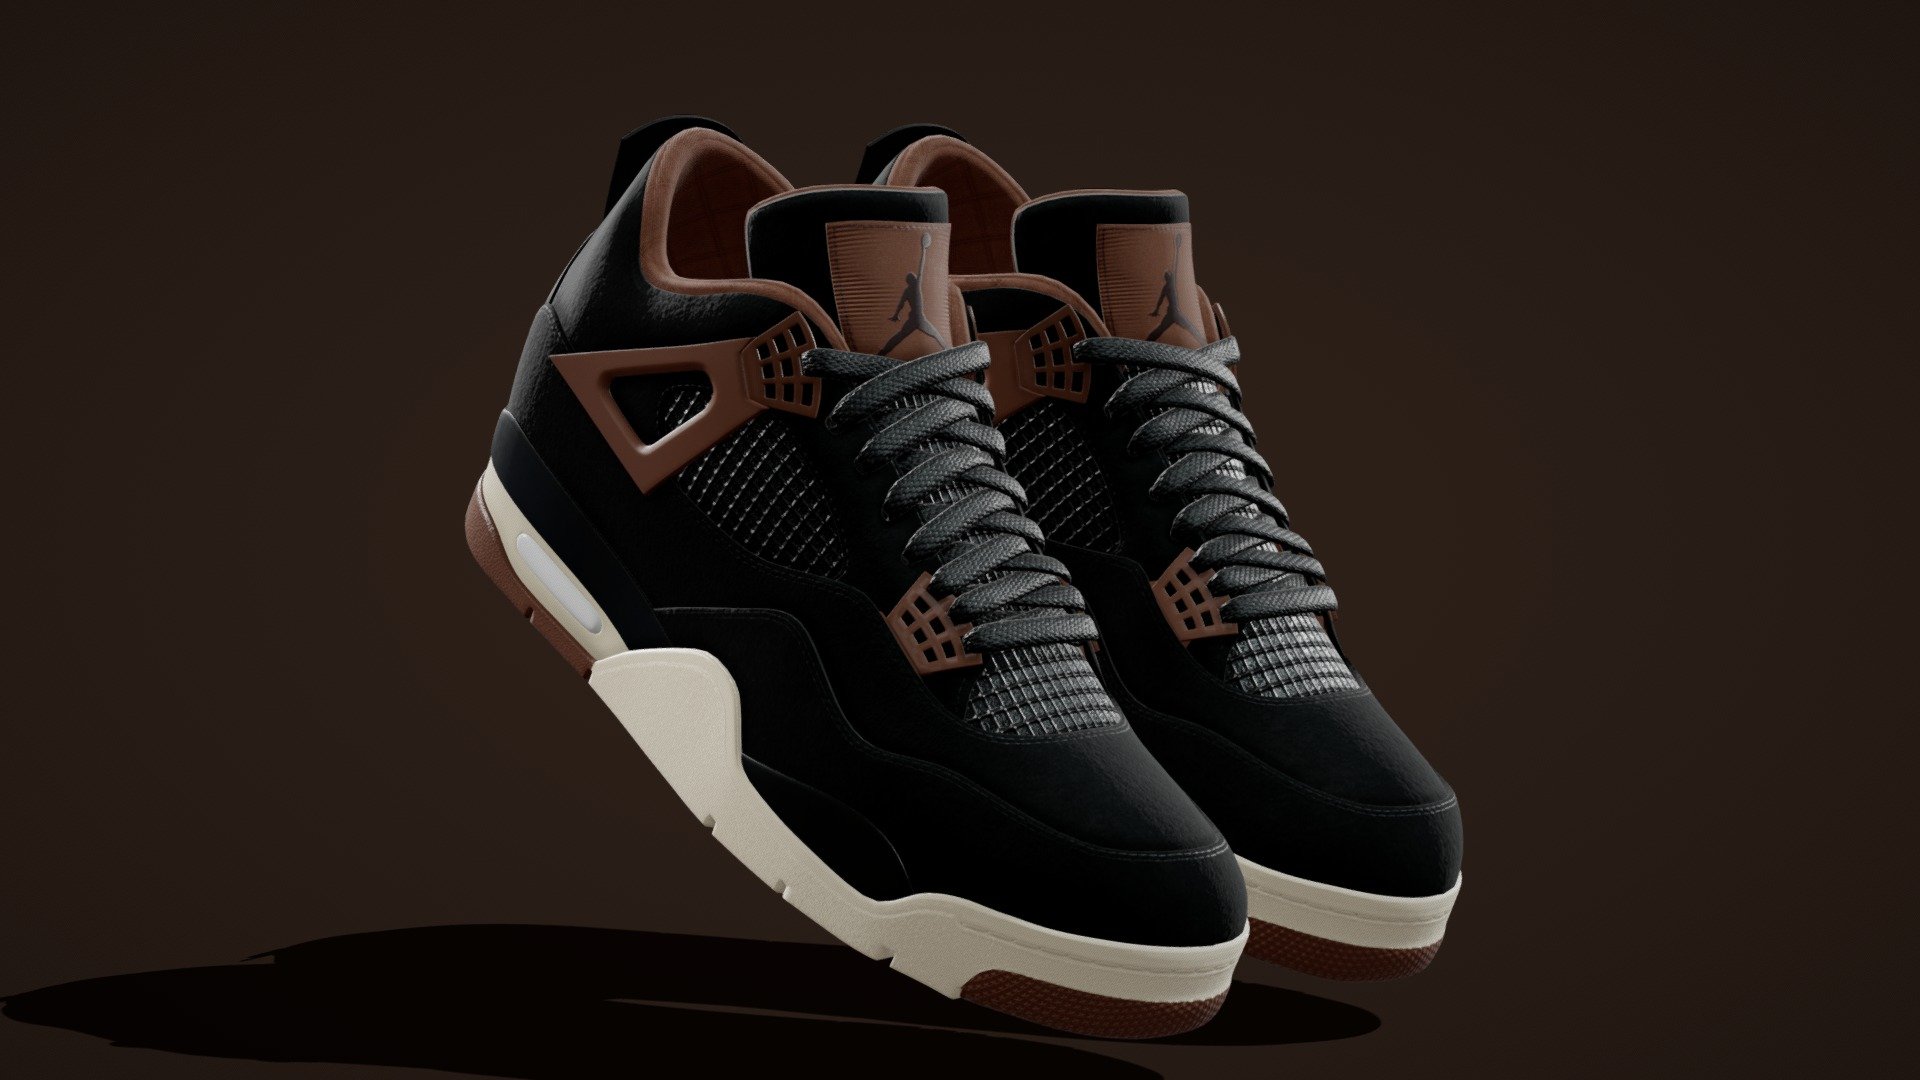 Here is a pair of high qulity Nike Shoes Air Jordan 4

2 Materals

4k Textures

140000 Poly

Great for any render project

Feel free to Comment or contact for any query 3d model